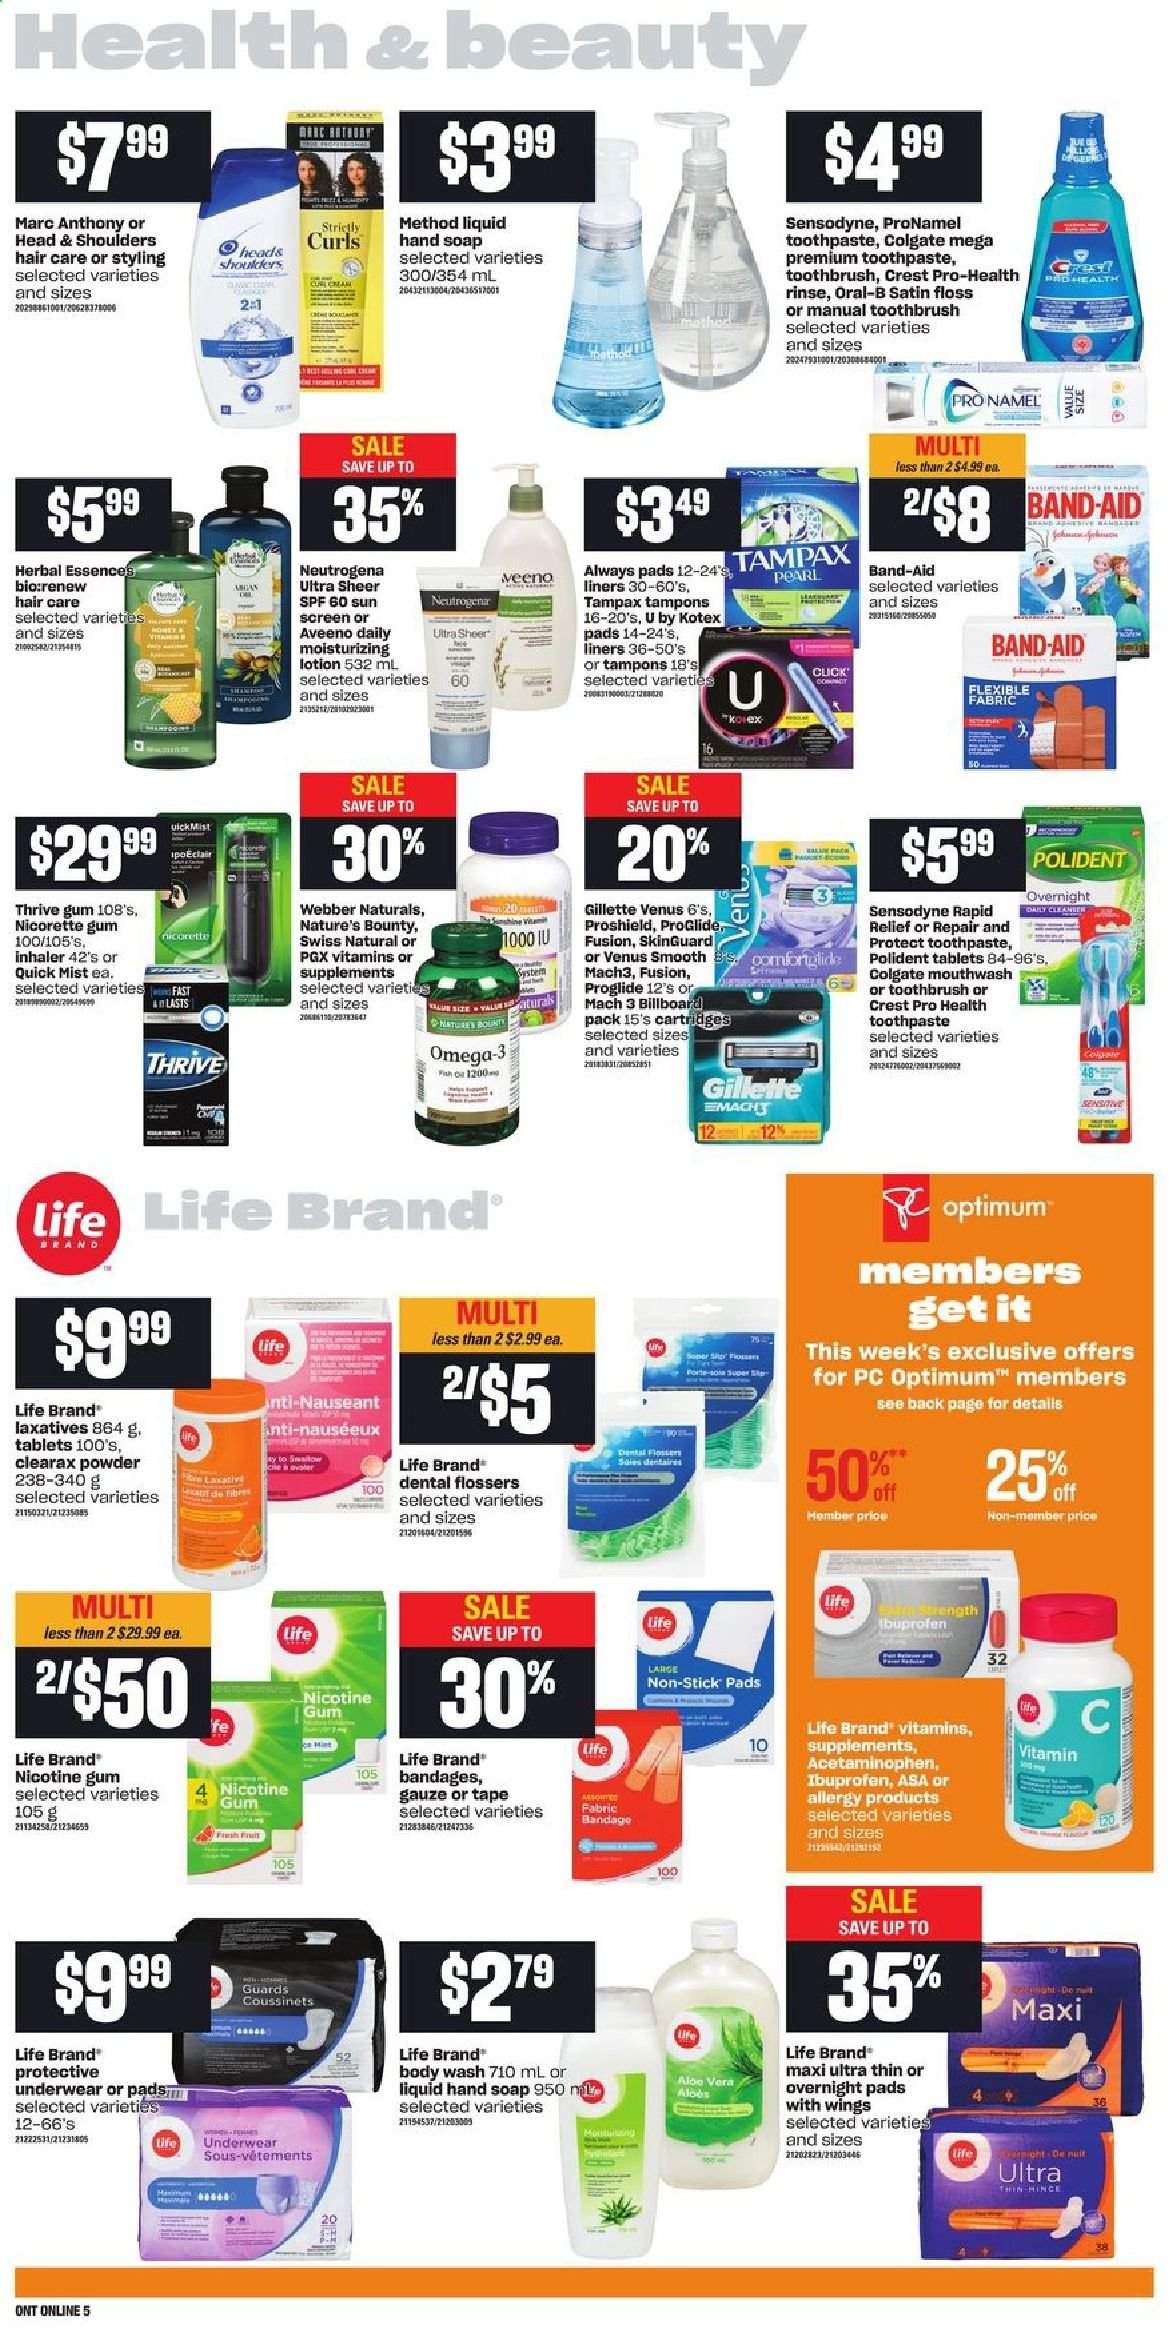 thumbnail - Loblaws Flyer - June 10, 2021 - June 16, 2021 - Sales products - Aveeno, body wash, hand soap, soap, toothbrush, toothpaste, mouthwash, Polident, Crest, Always pads, sanitary pads, Kotex, Kotex pads, tampons, Herbal Essences, body lotion, Venus, Optimum, Nature's Bounty, Nicorette, nicotine therapy, Ibuprofen, Omega-3, Nicorette Gum, Gillette, Neutrogena, Tampax, Head & Shoulders, Oral-B, Sensodyne. Page 11.